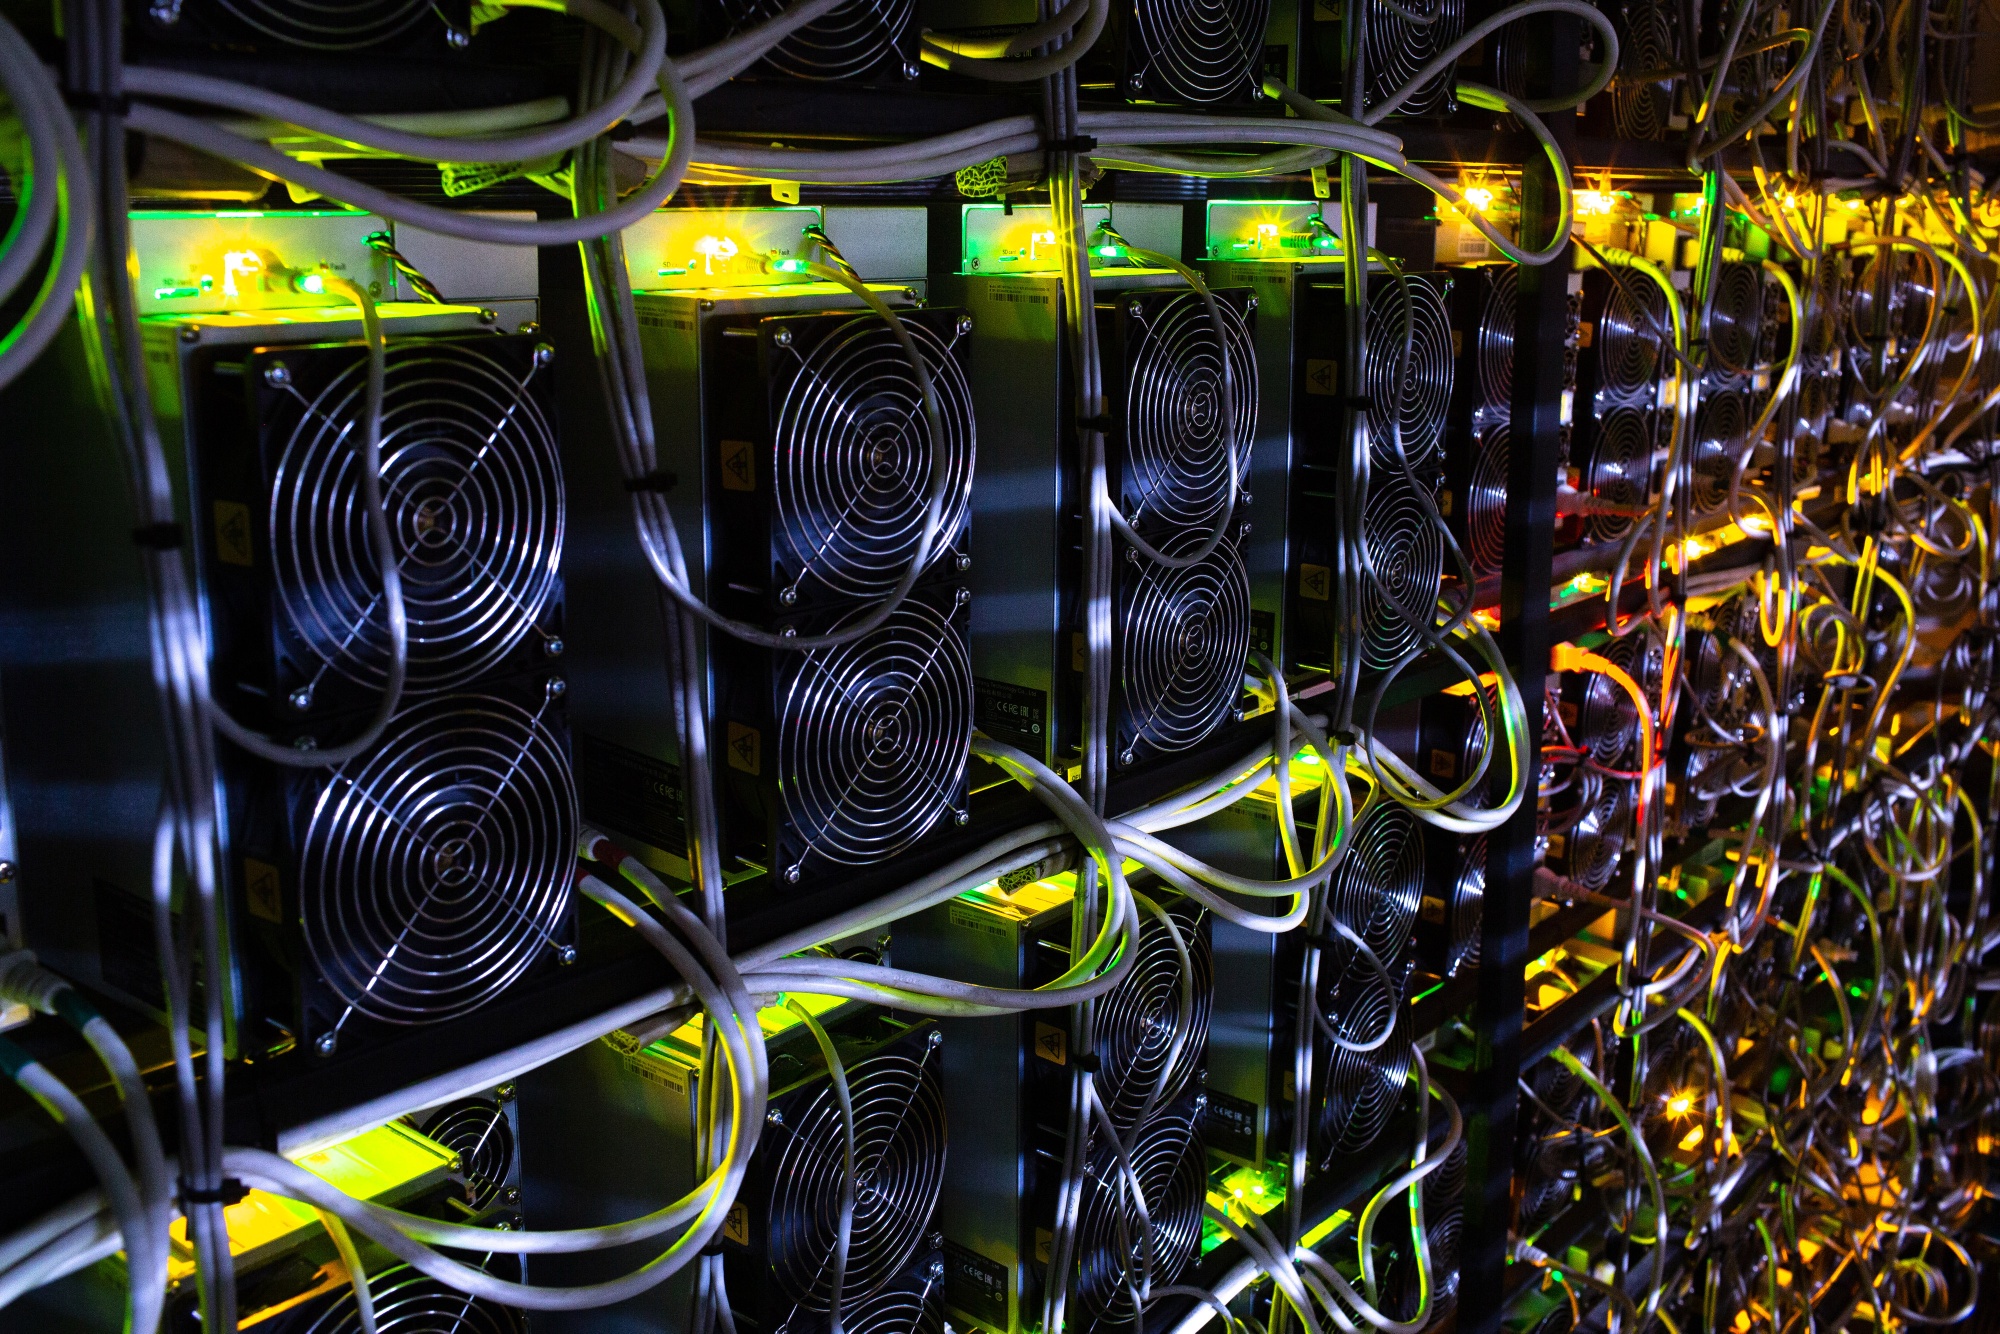 MicroStrategy Acquires Another $650 Million Worth of Bitcoin